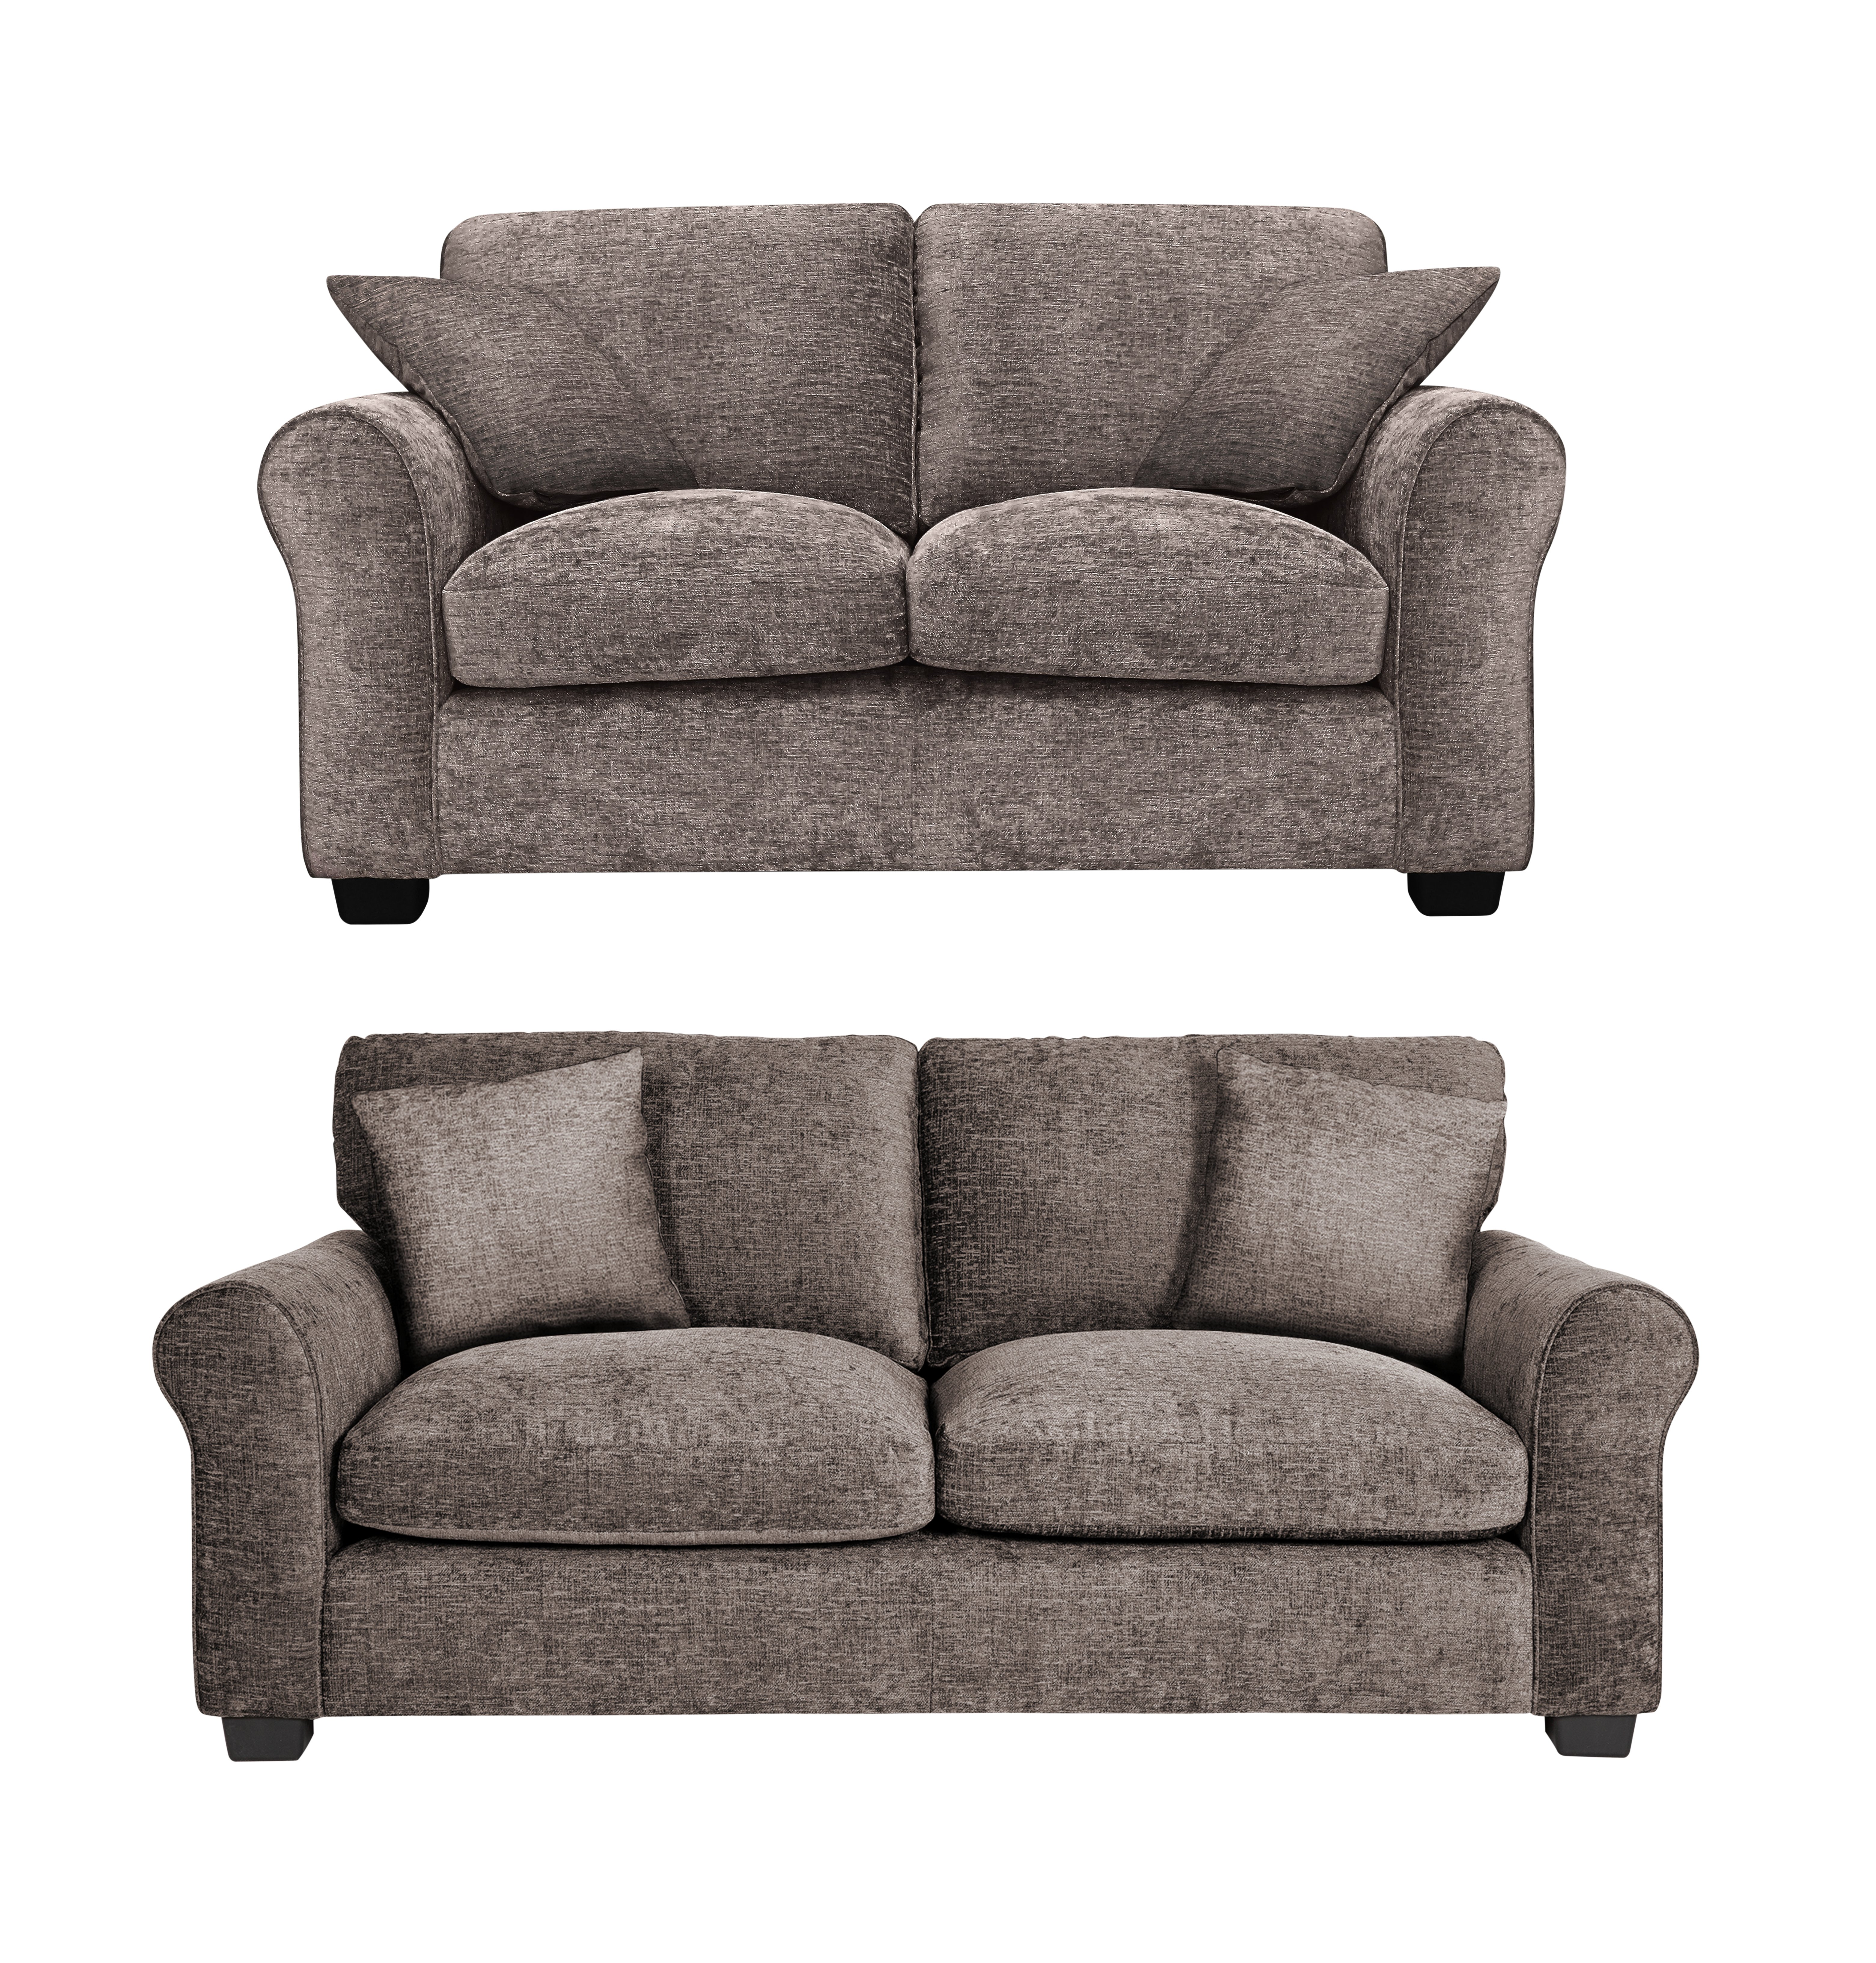 Argos Home Taylor Fabric 2 Seater & 3 Seater Sofa - Mink